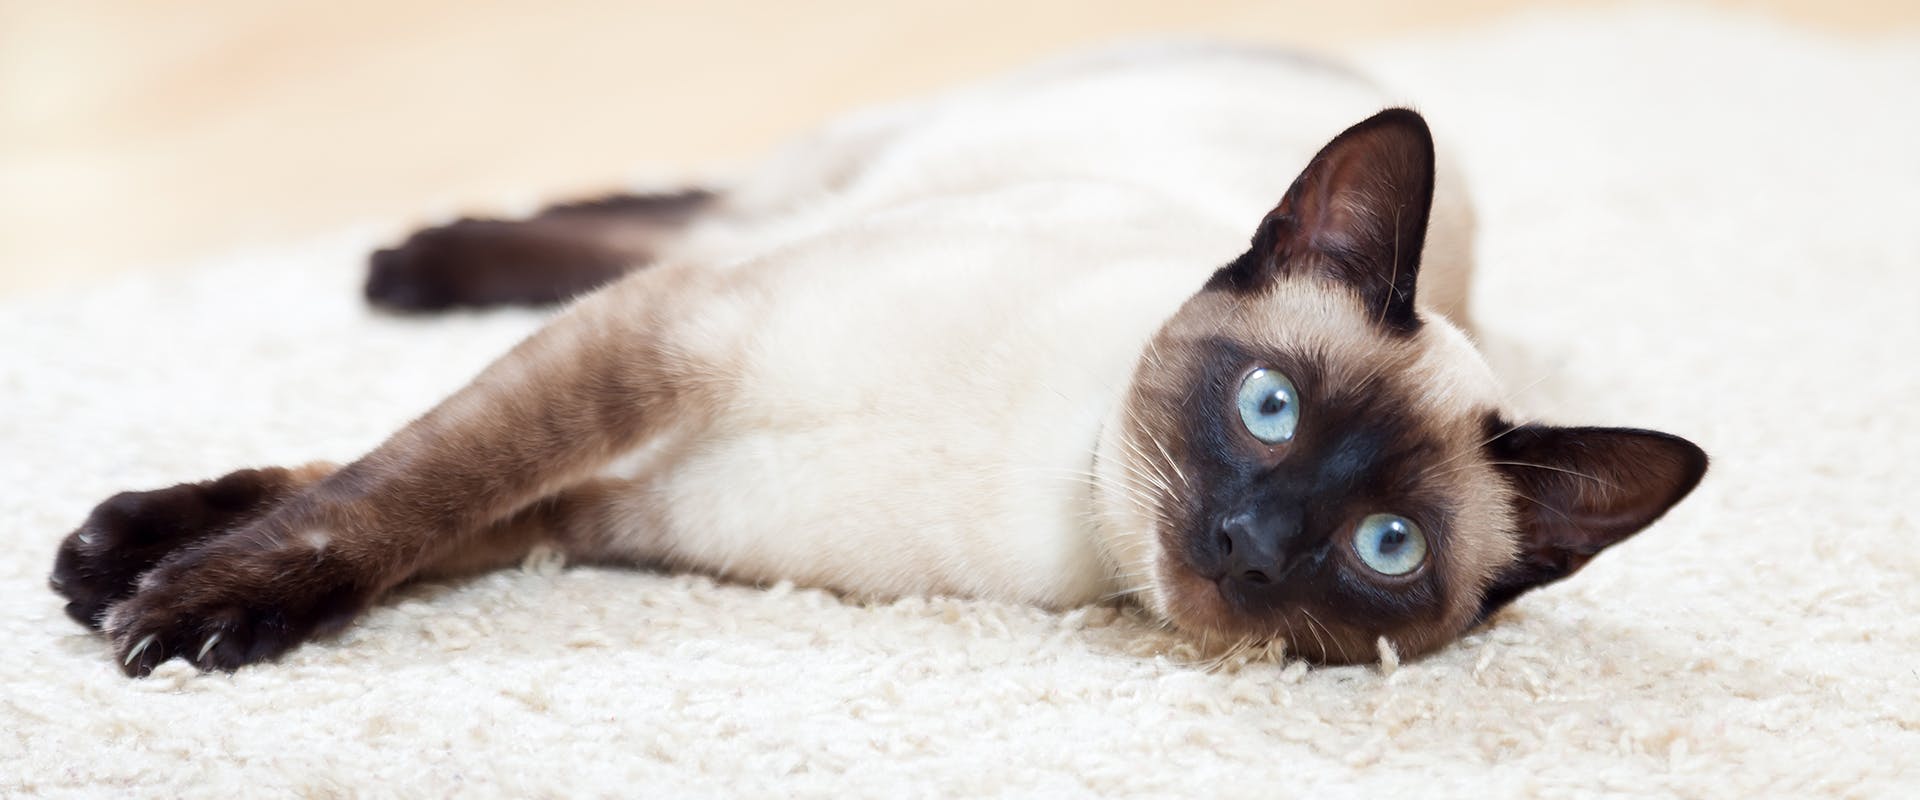 A Siamese cat laying on a fluffy white rug